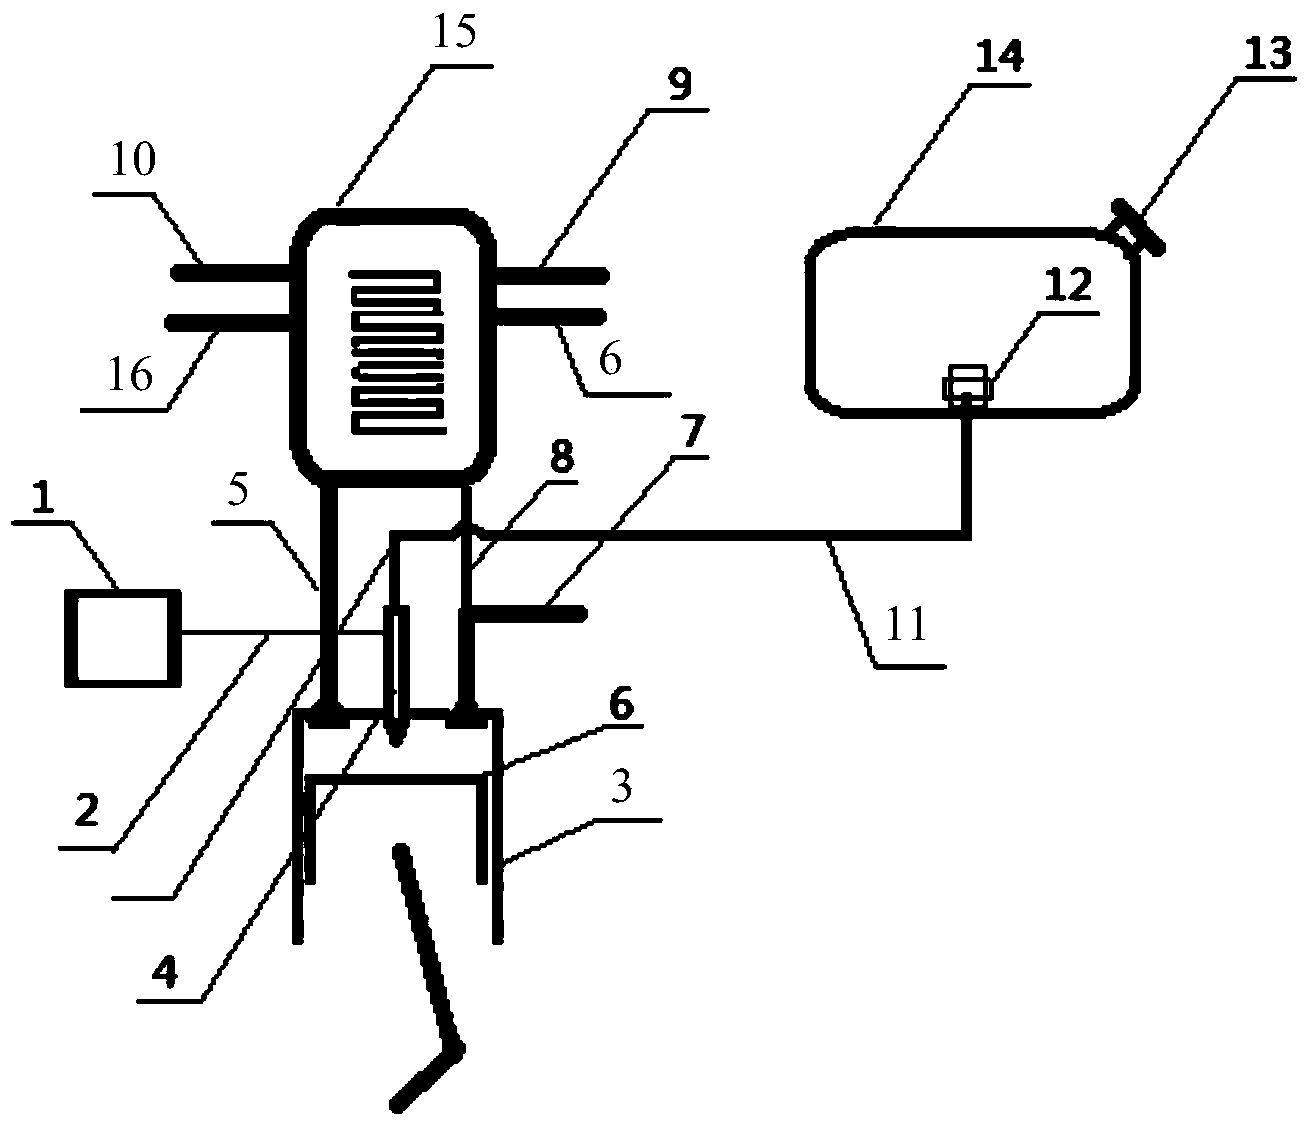 Hybrid power device and system with fuel and direct-injection liquid gas and power output construction method